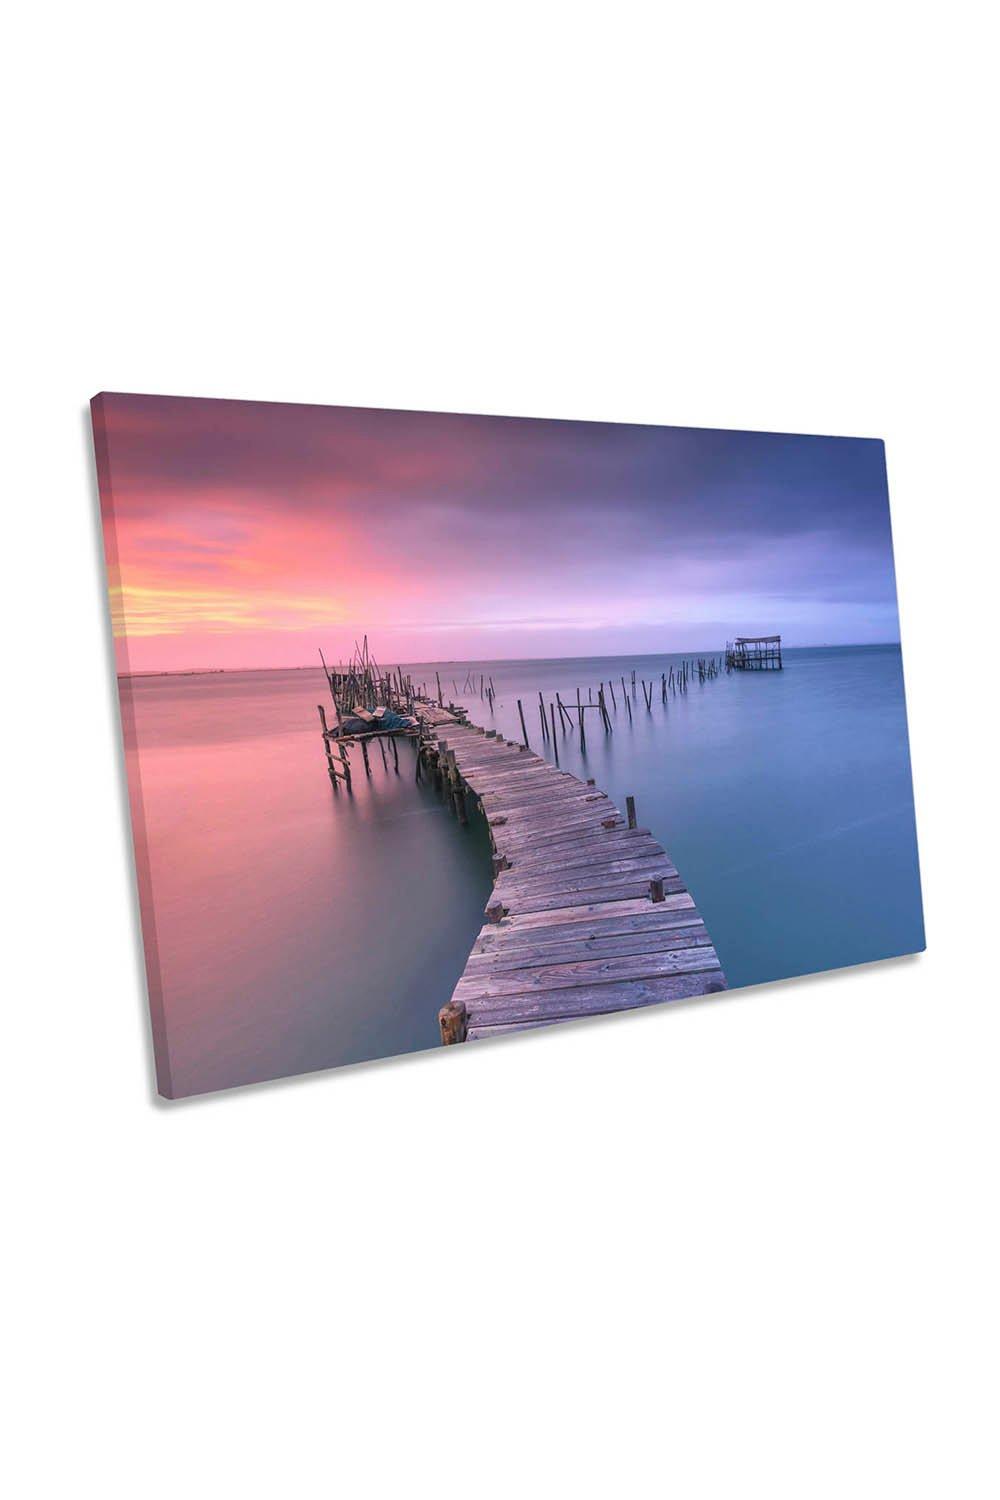 Carrasqueira Portugal Jetty Sunset Canvas Wall Art Picture Print